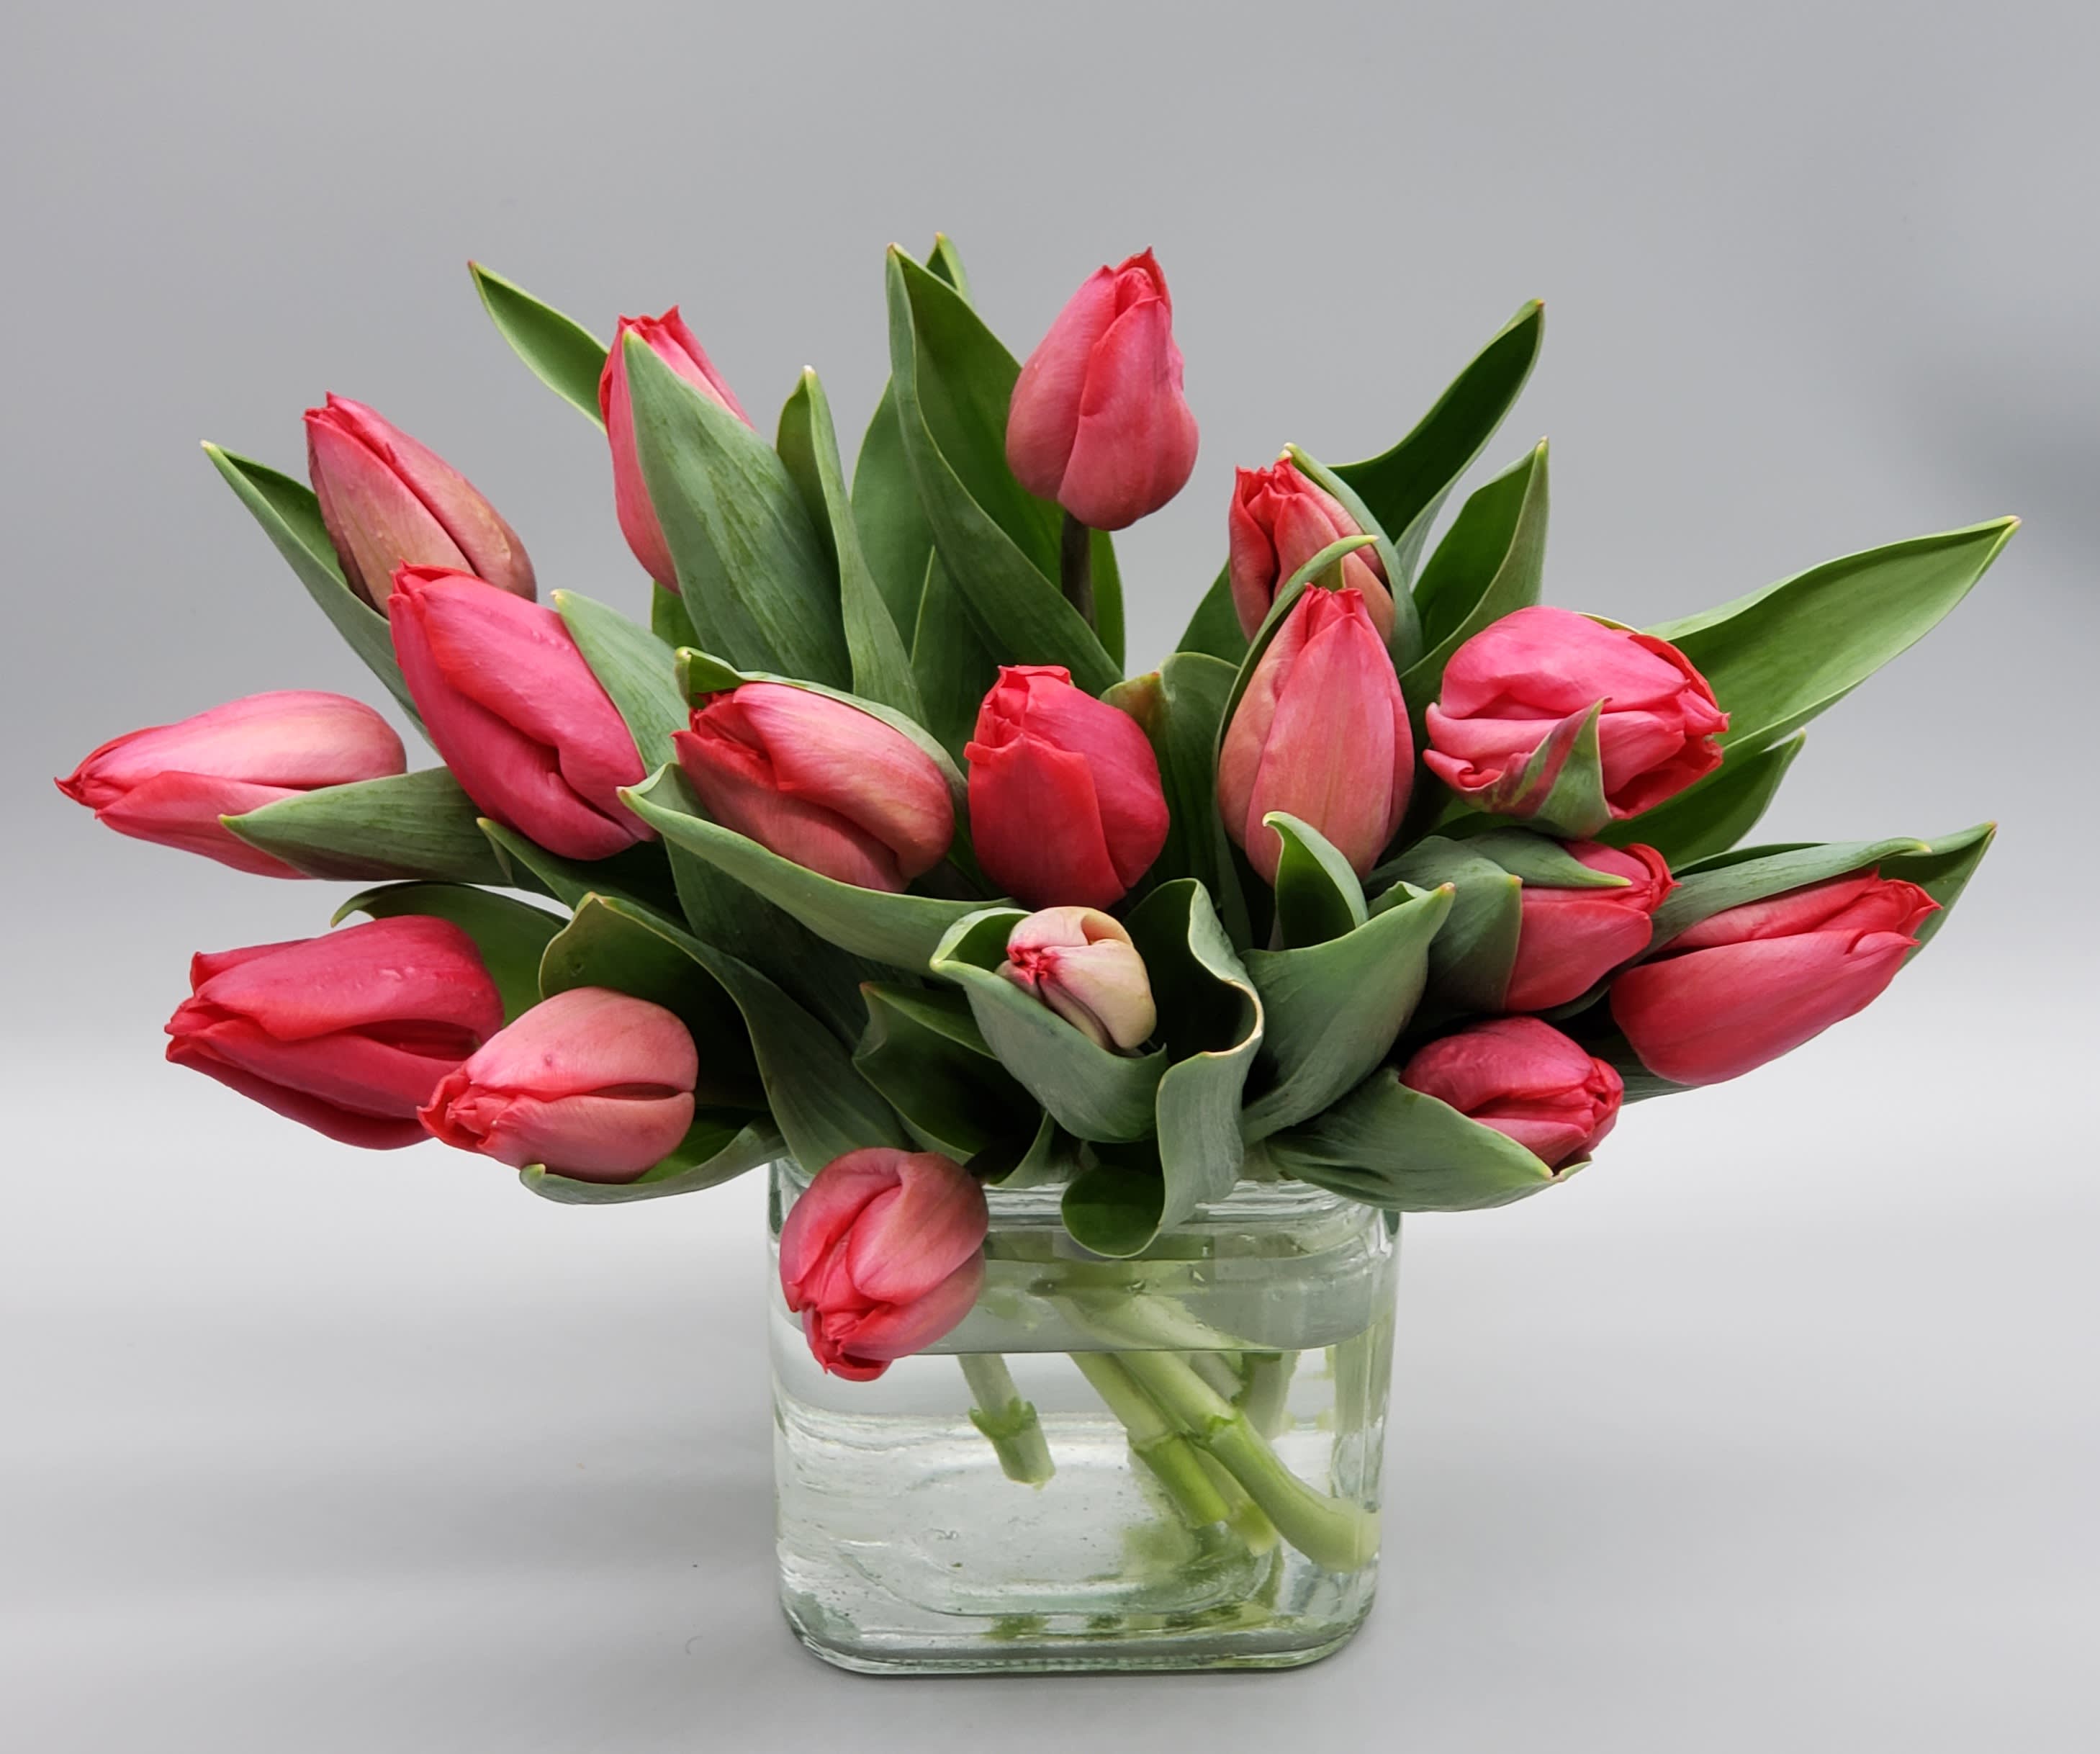 Tulips Galore - We have beautiful tulips to adorn your space . Tulips put a smile on everyones face!